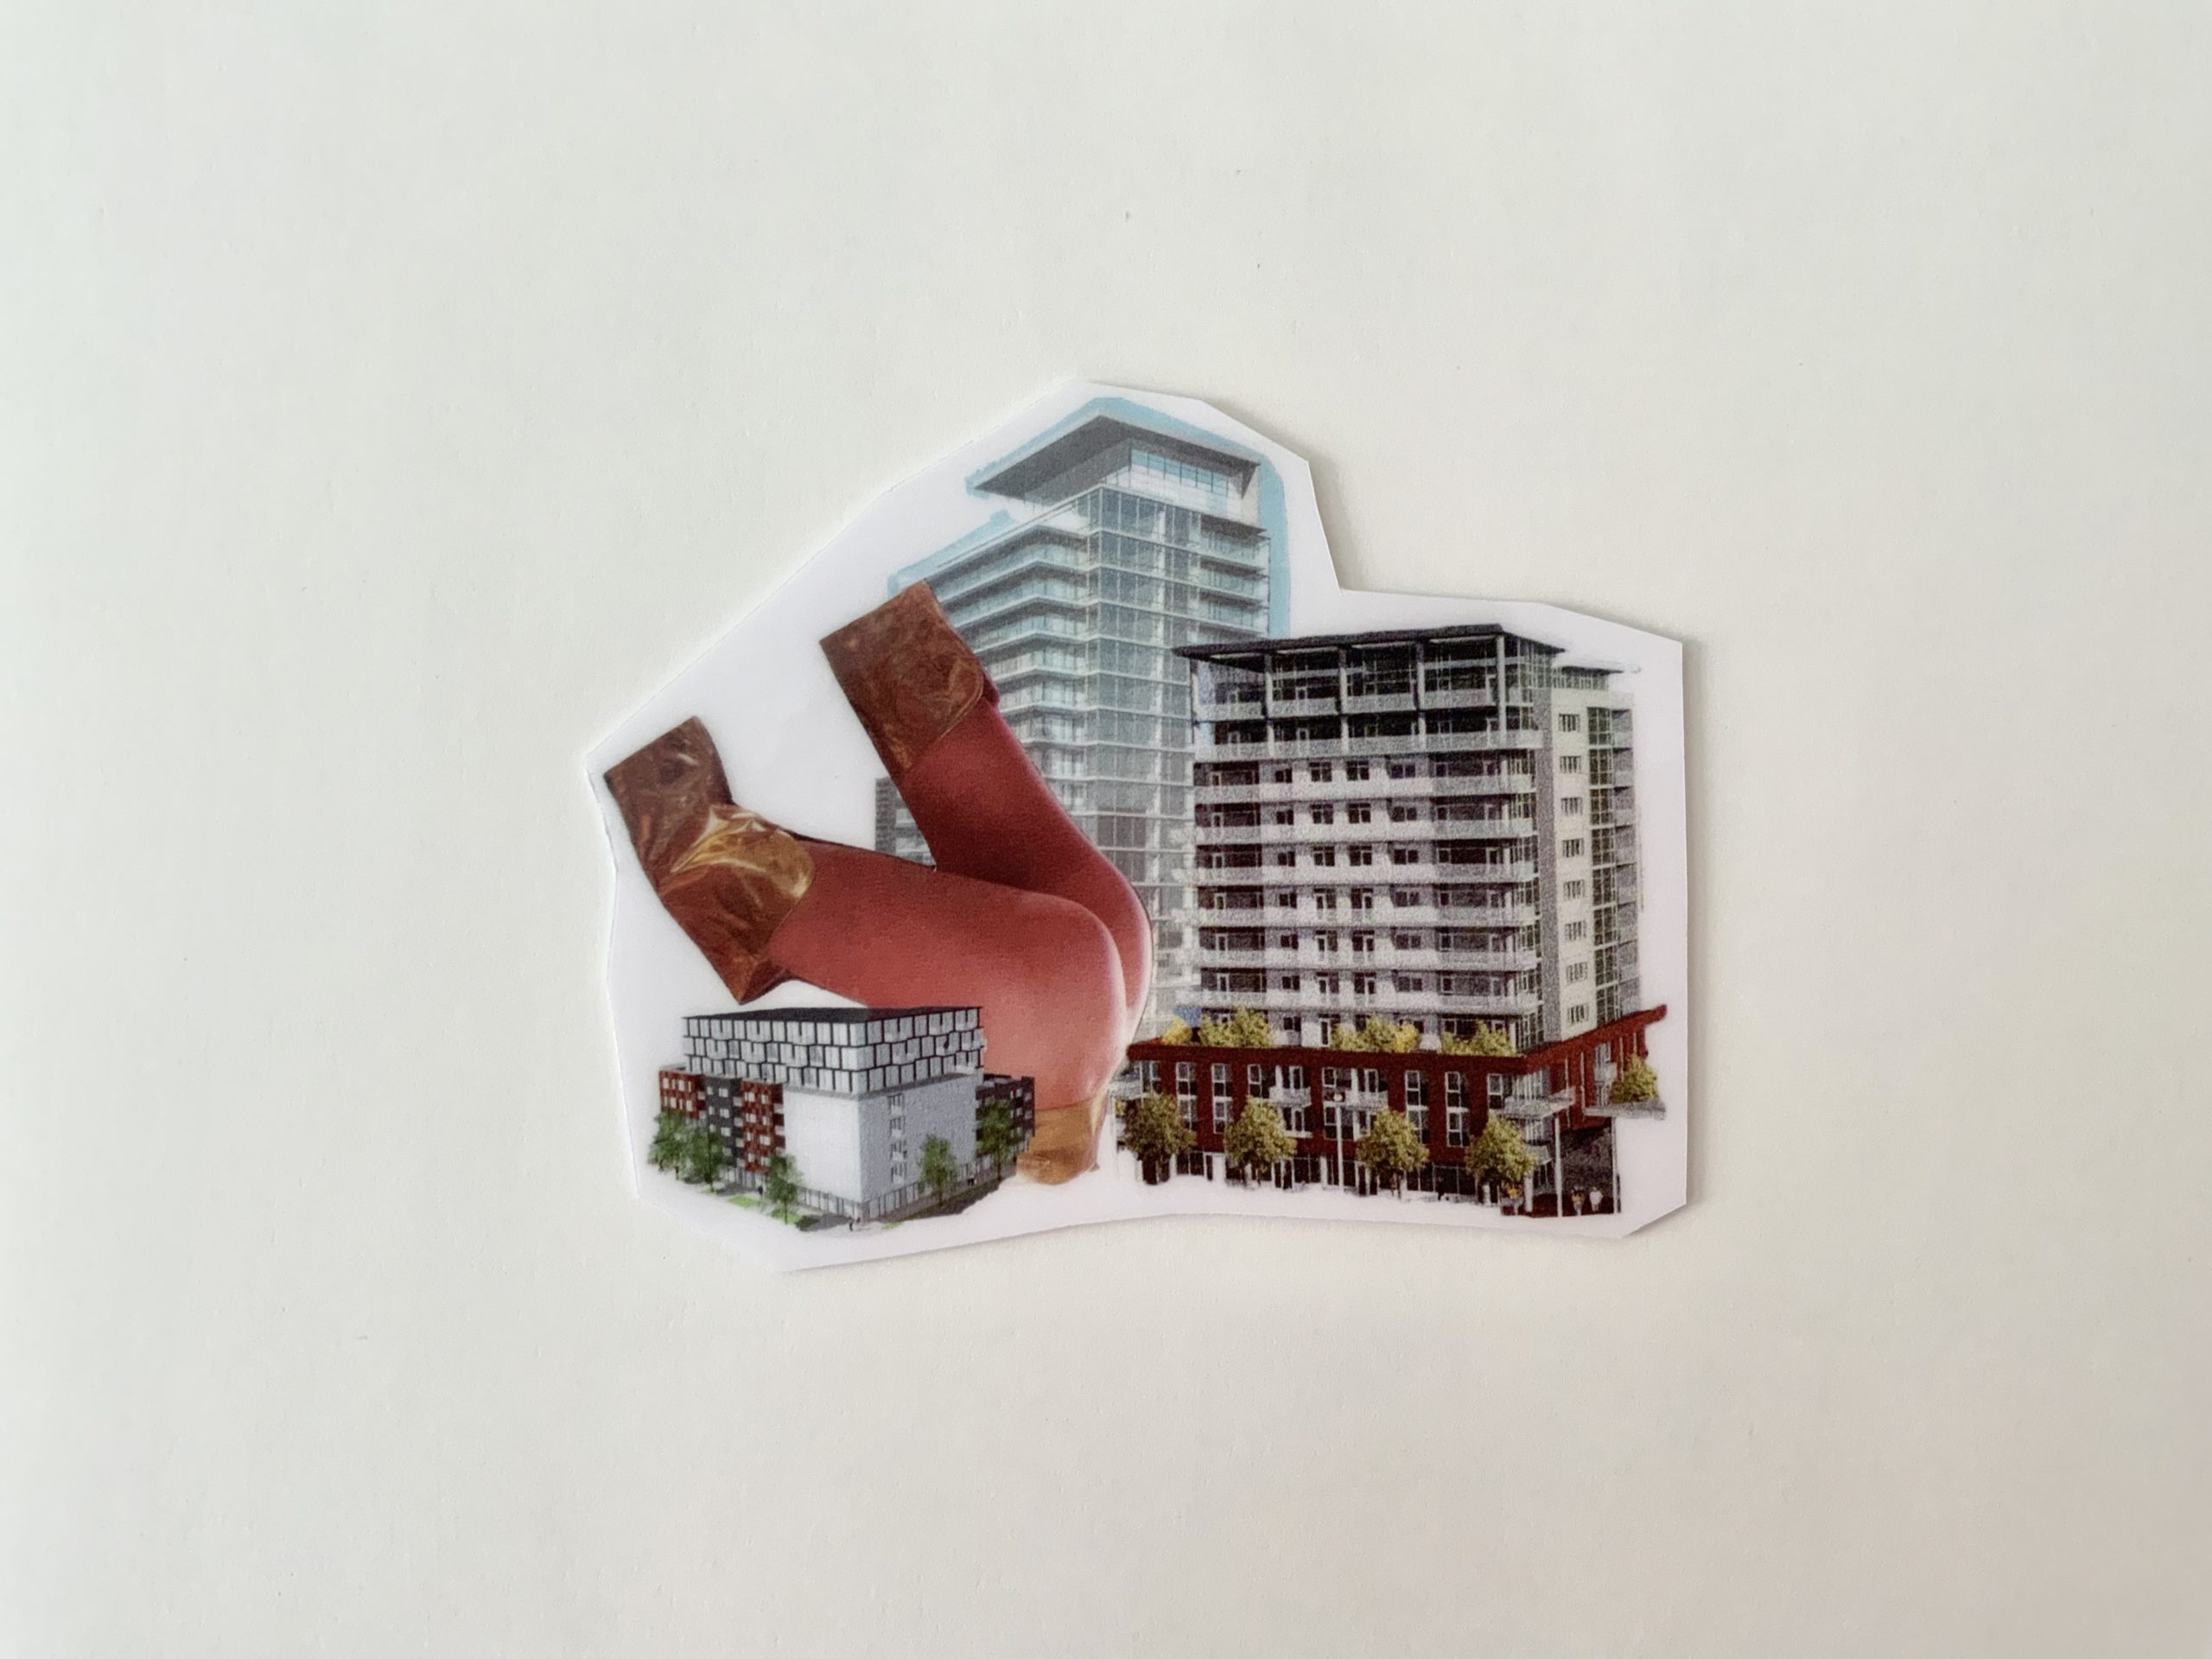 Photo of a cutout collage artwork by Arjun Lal on a white background. The artwork features legs and condo buildings.